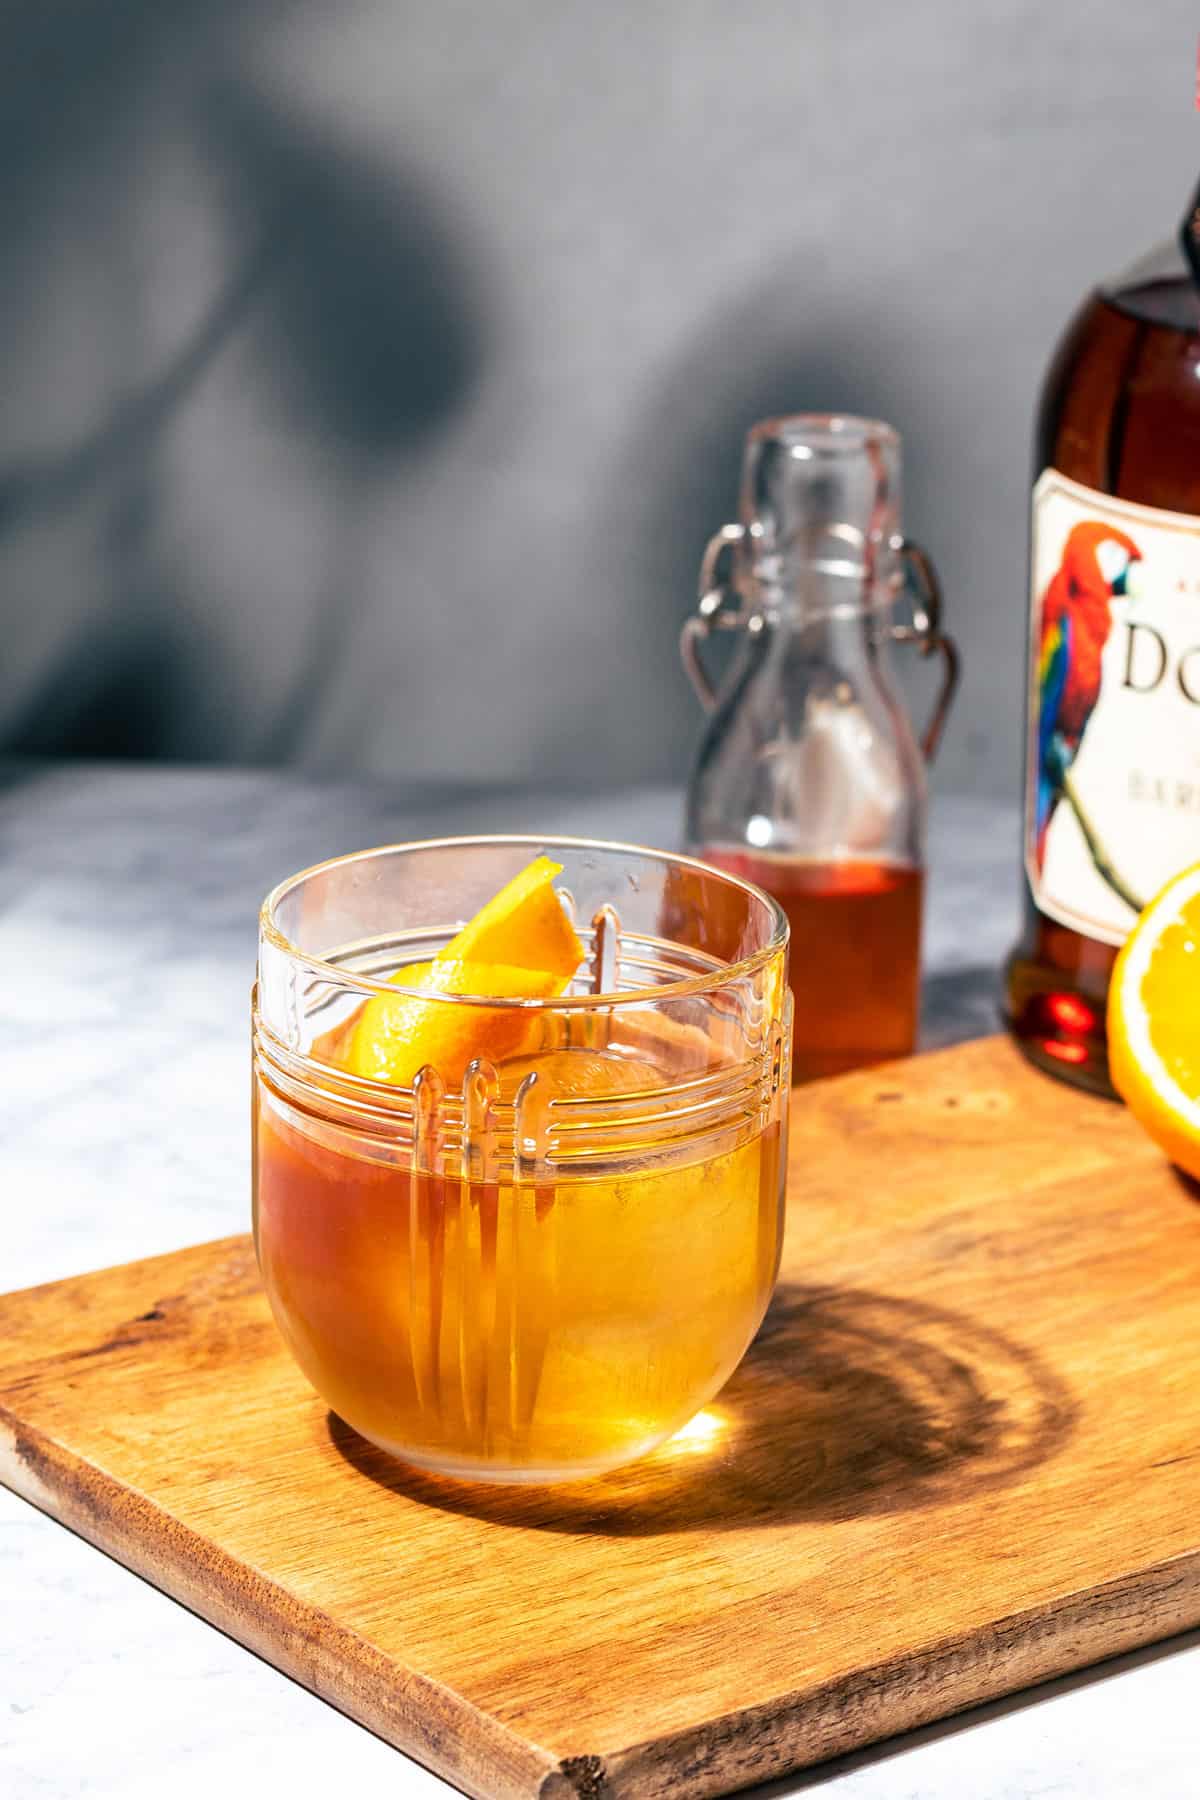 Old fashioned sitting on a wood cutting board with a bottle of rum, syrup, and citrus in the background.